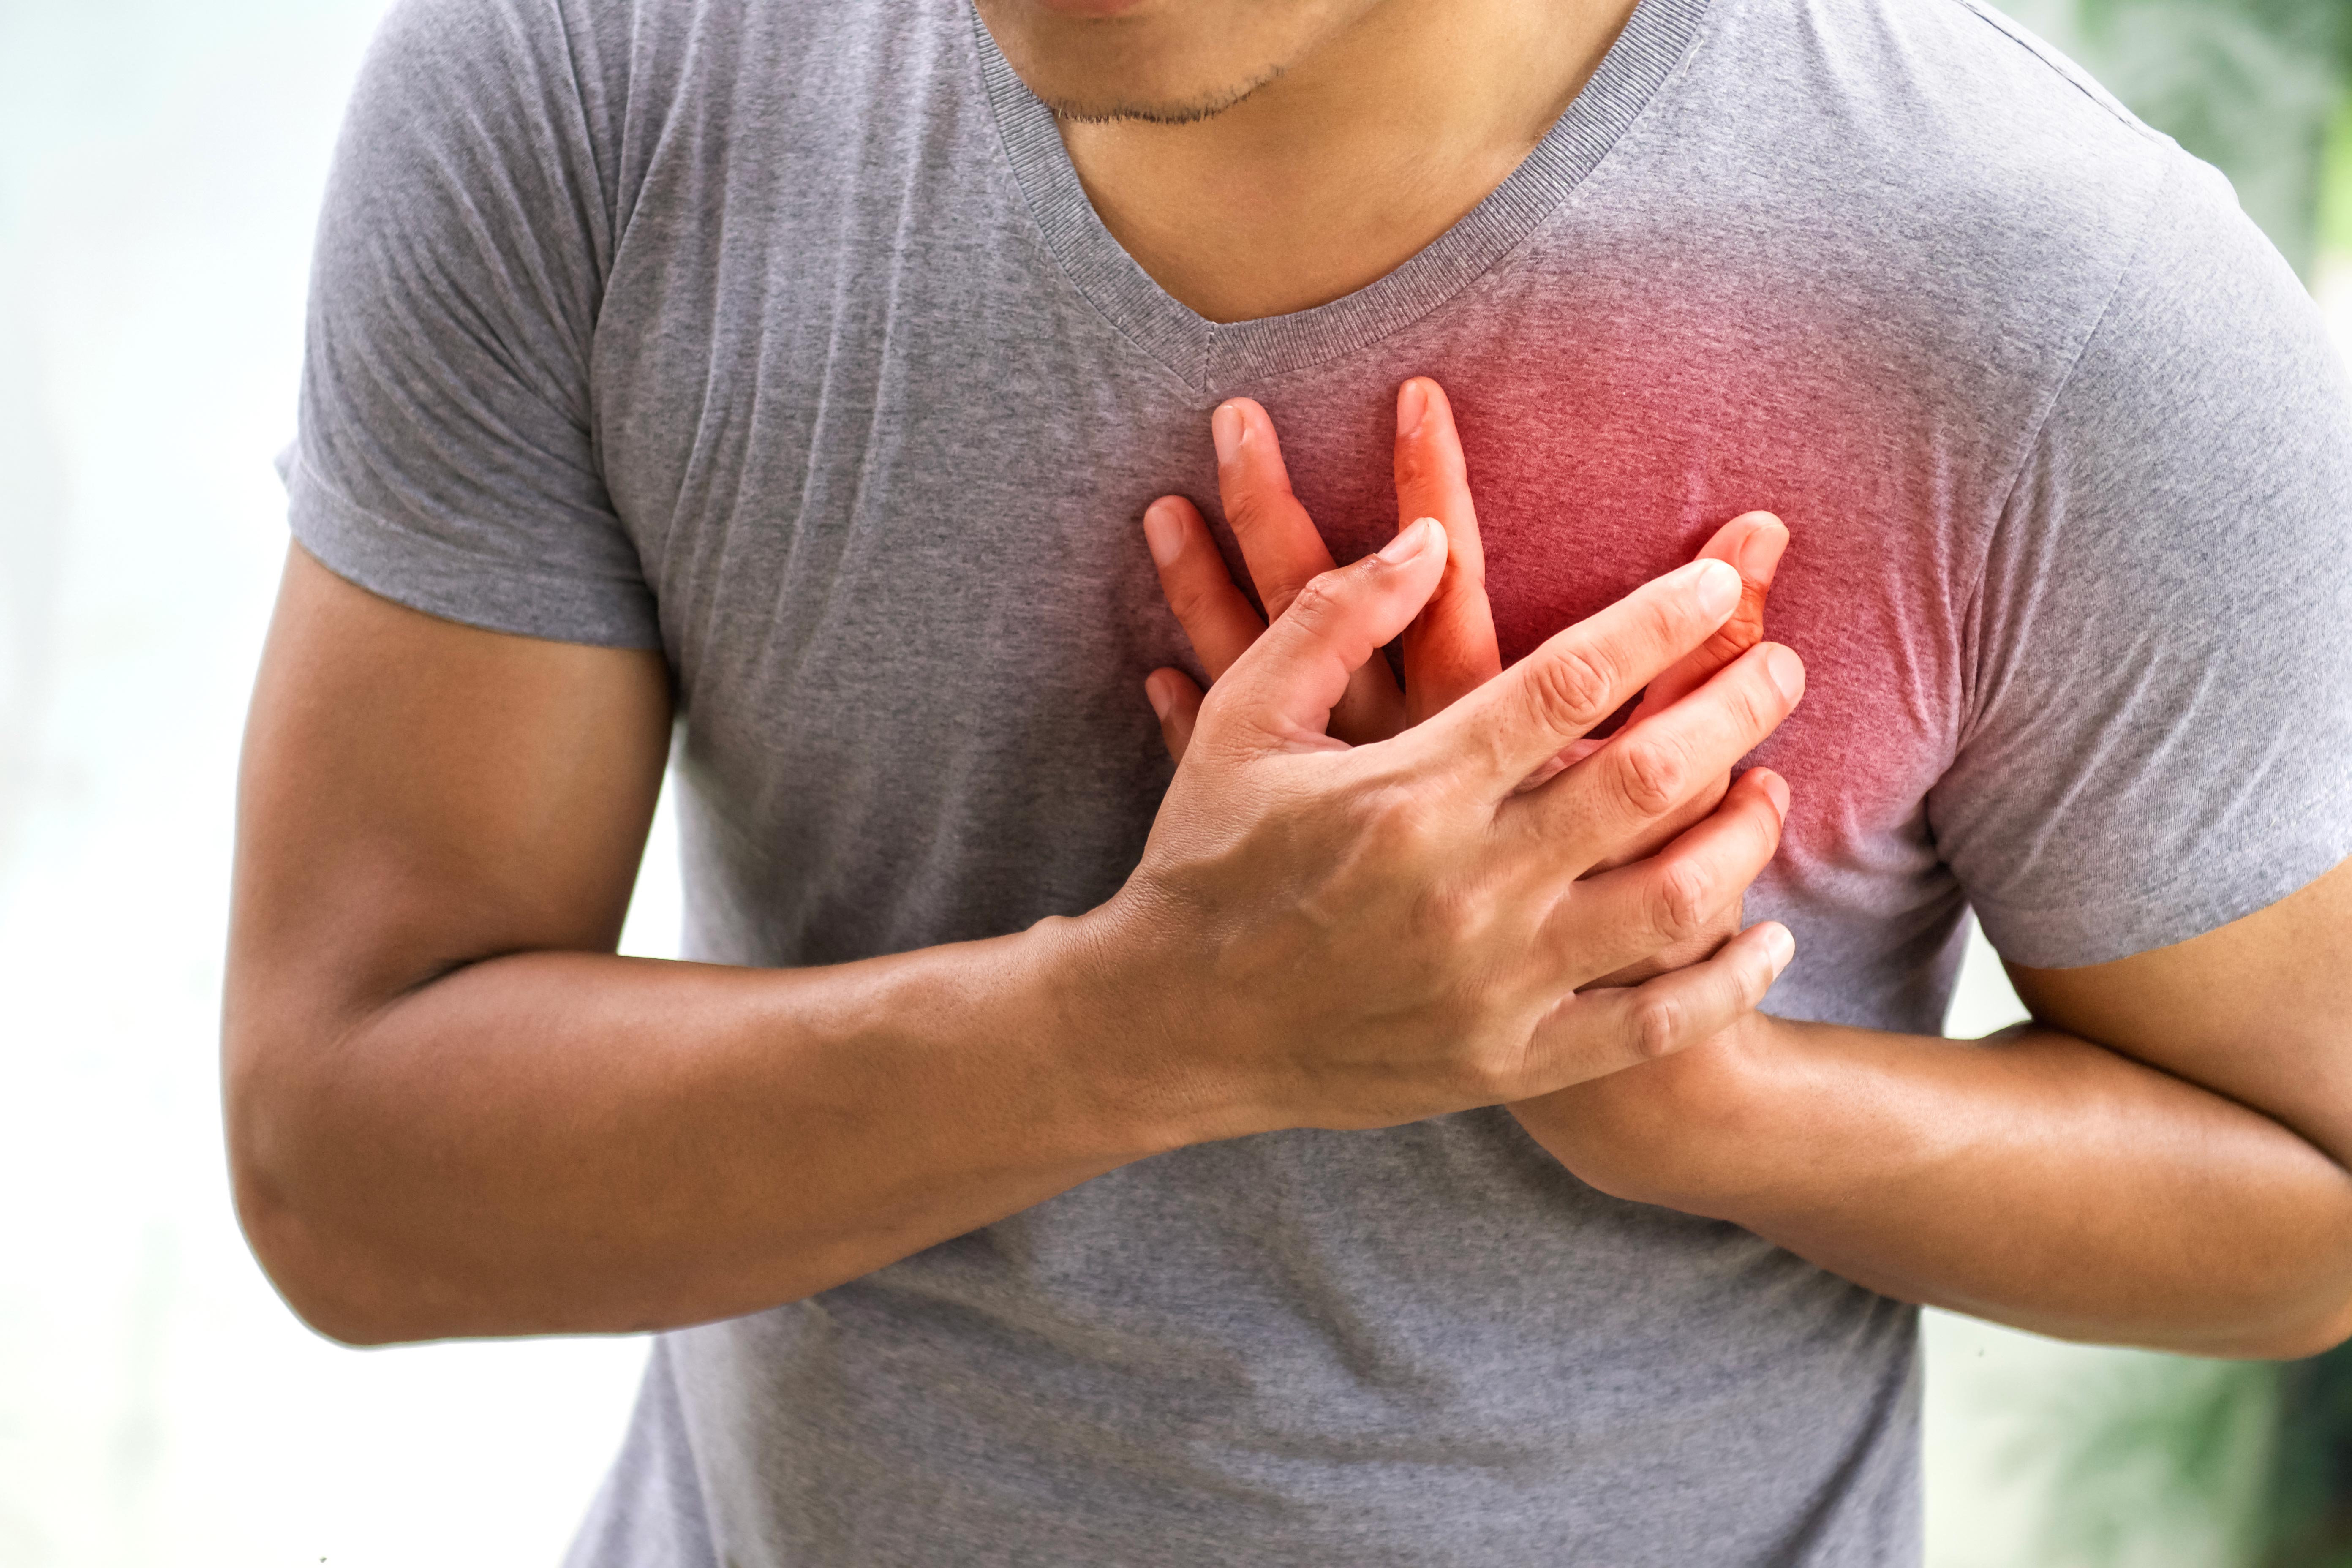 Cardiomyopathy makes the heart muscles weak, enlarged, and flabby.